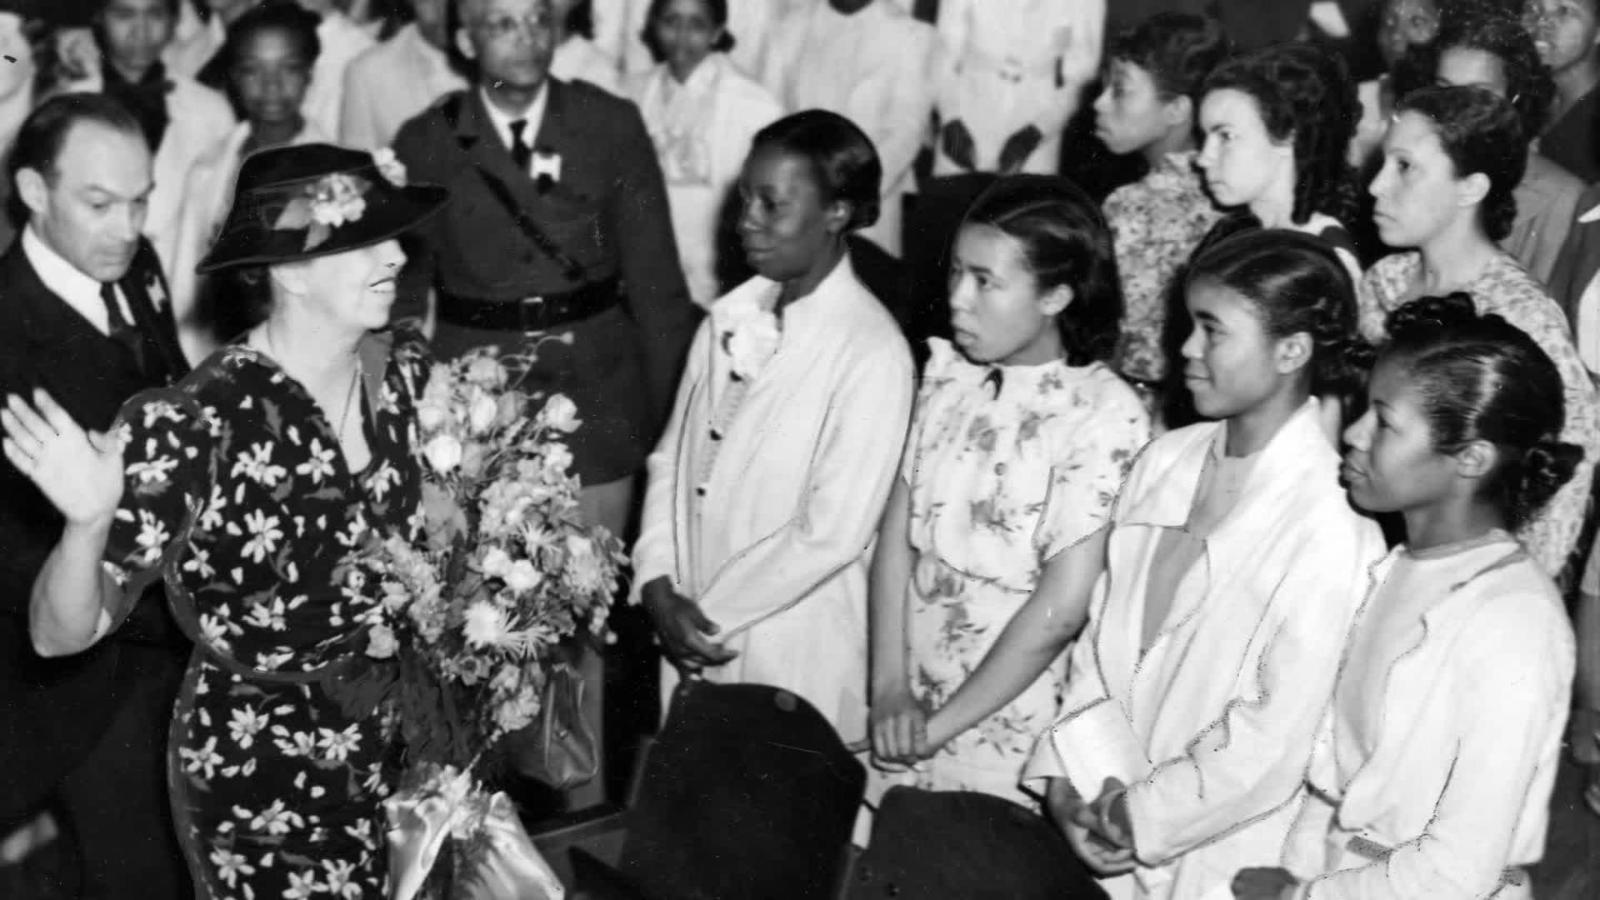 Civil rights was at the top of Eleanor Roosevelt's agenda